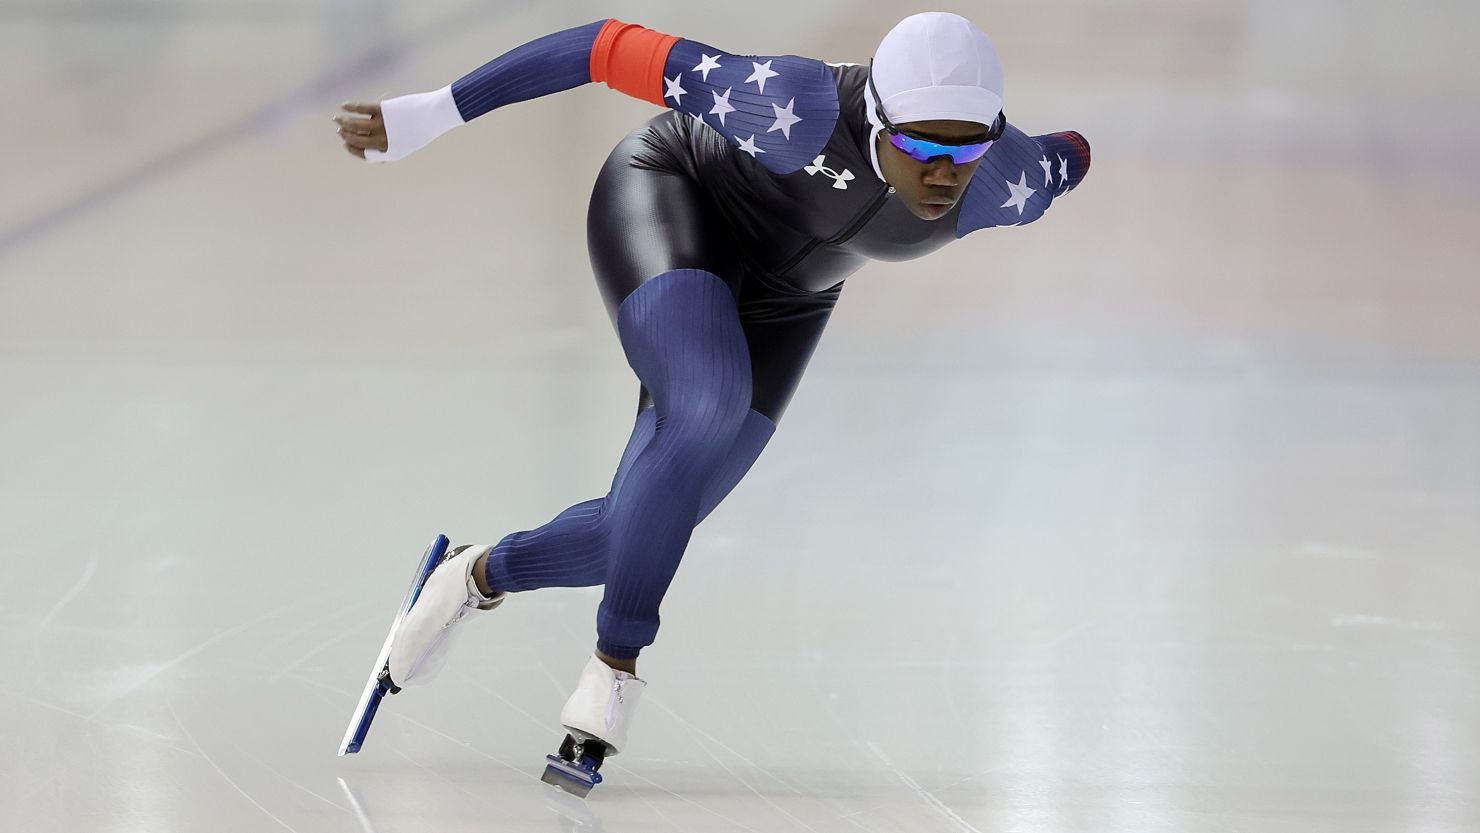 Erin Jackson competes in the Women's 1,500m event during the 2022 US Speedskating Long Track Olympic Trials on January 8.